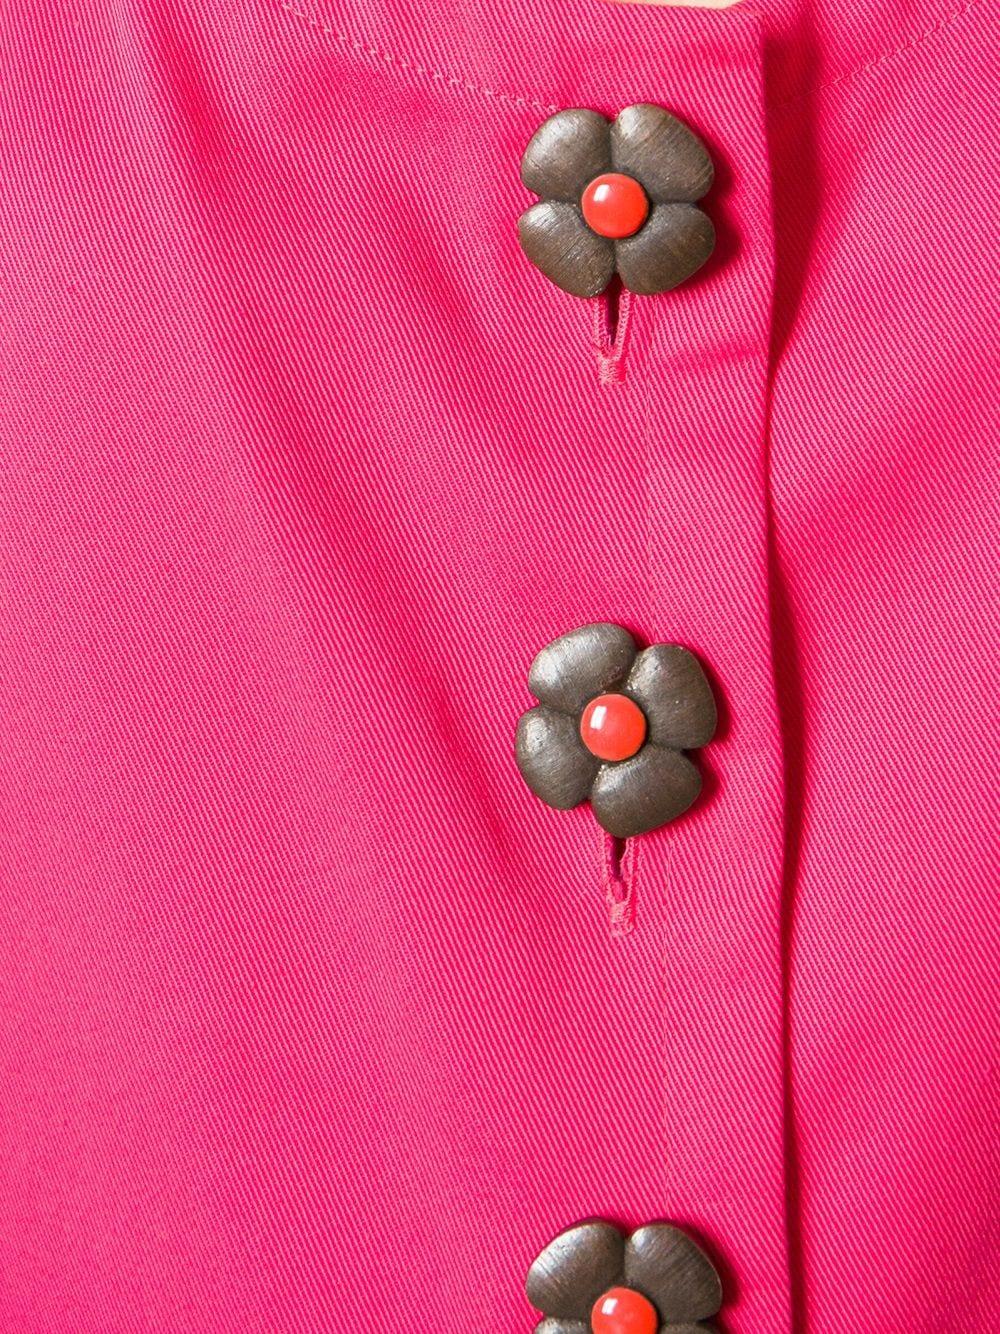 Summer Yves Saint Laurent  pink red cotton top featuring wood flowers front button opening fastening, a scoop neck, a sleeveless design and a straight hem. 
100% coton
In excellent vintage condition. Made in France. 
Estimated size 38fr/US6 /UK10
We